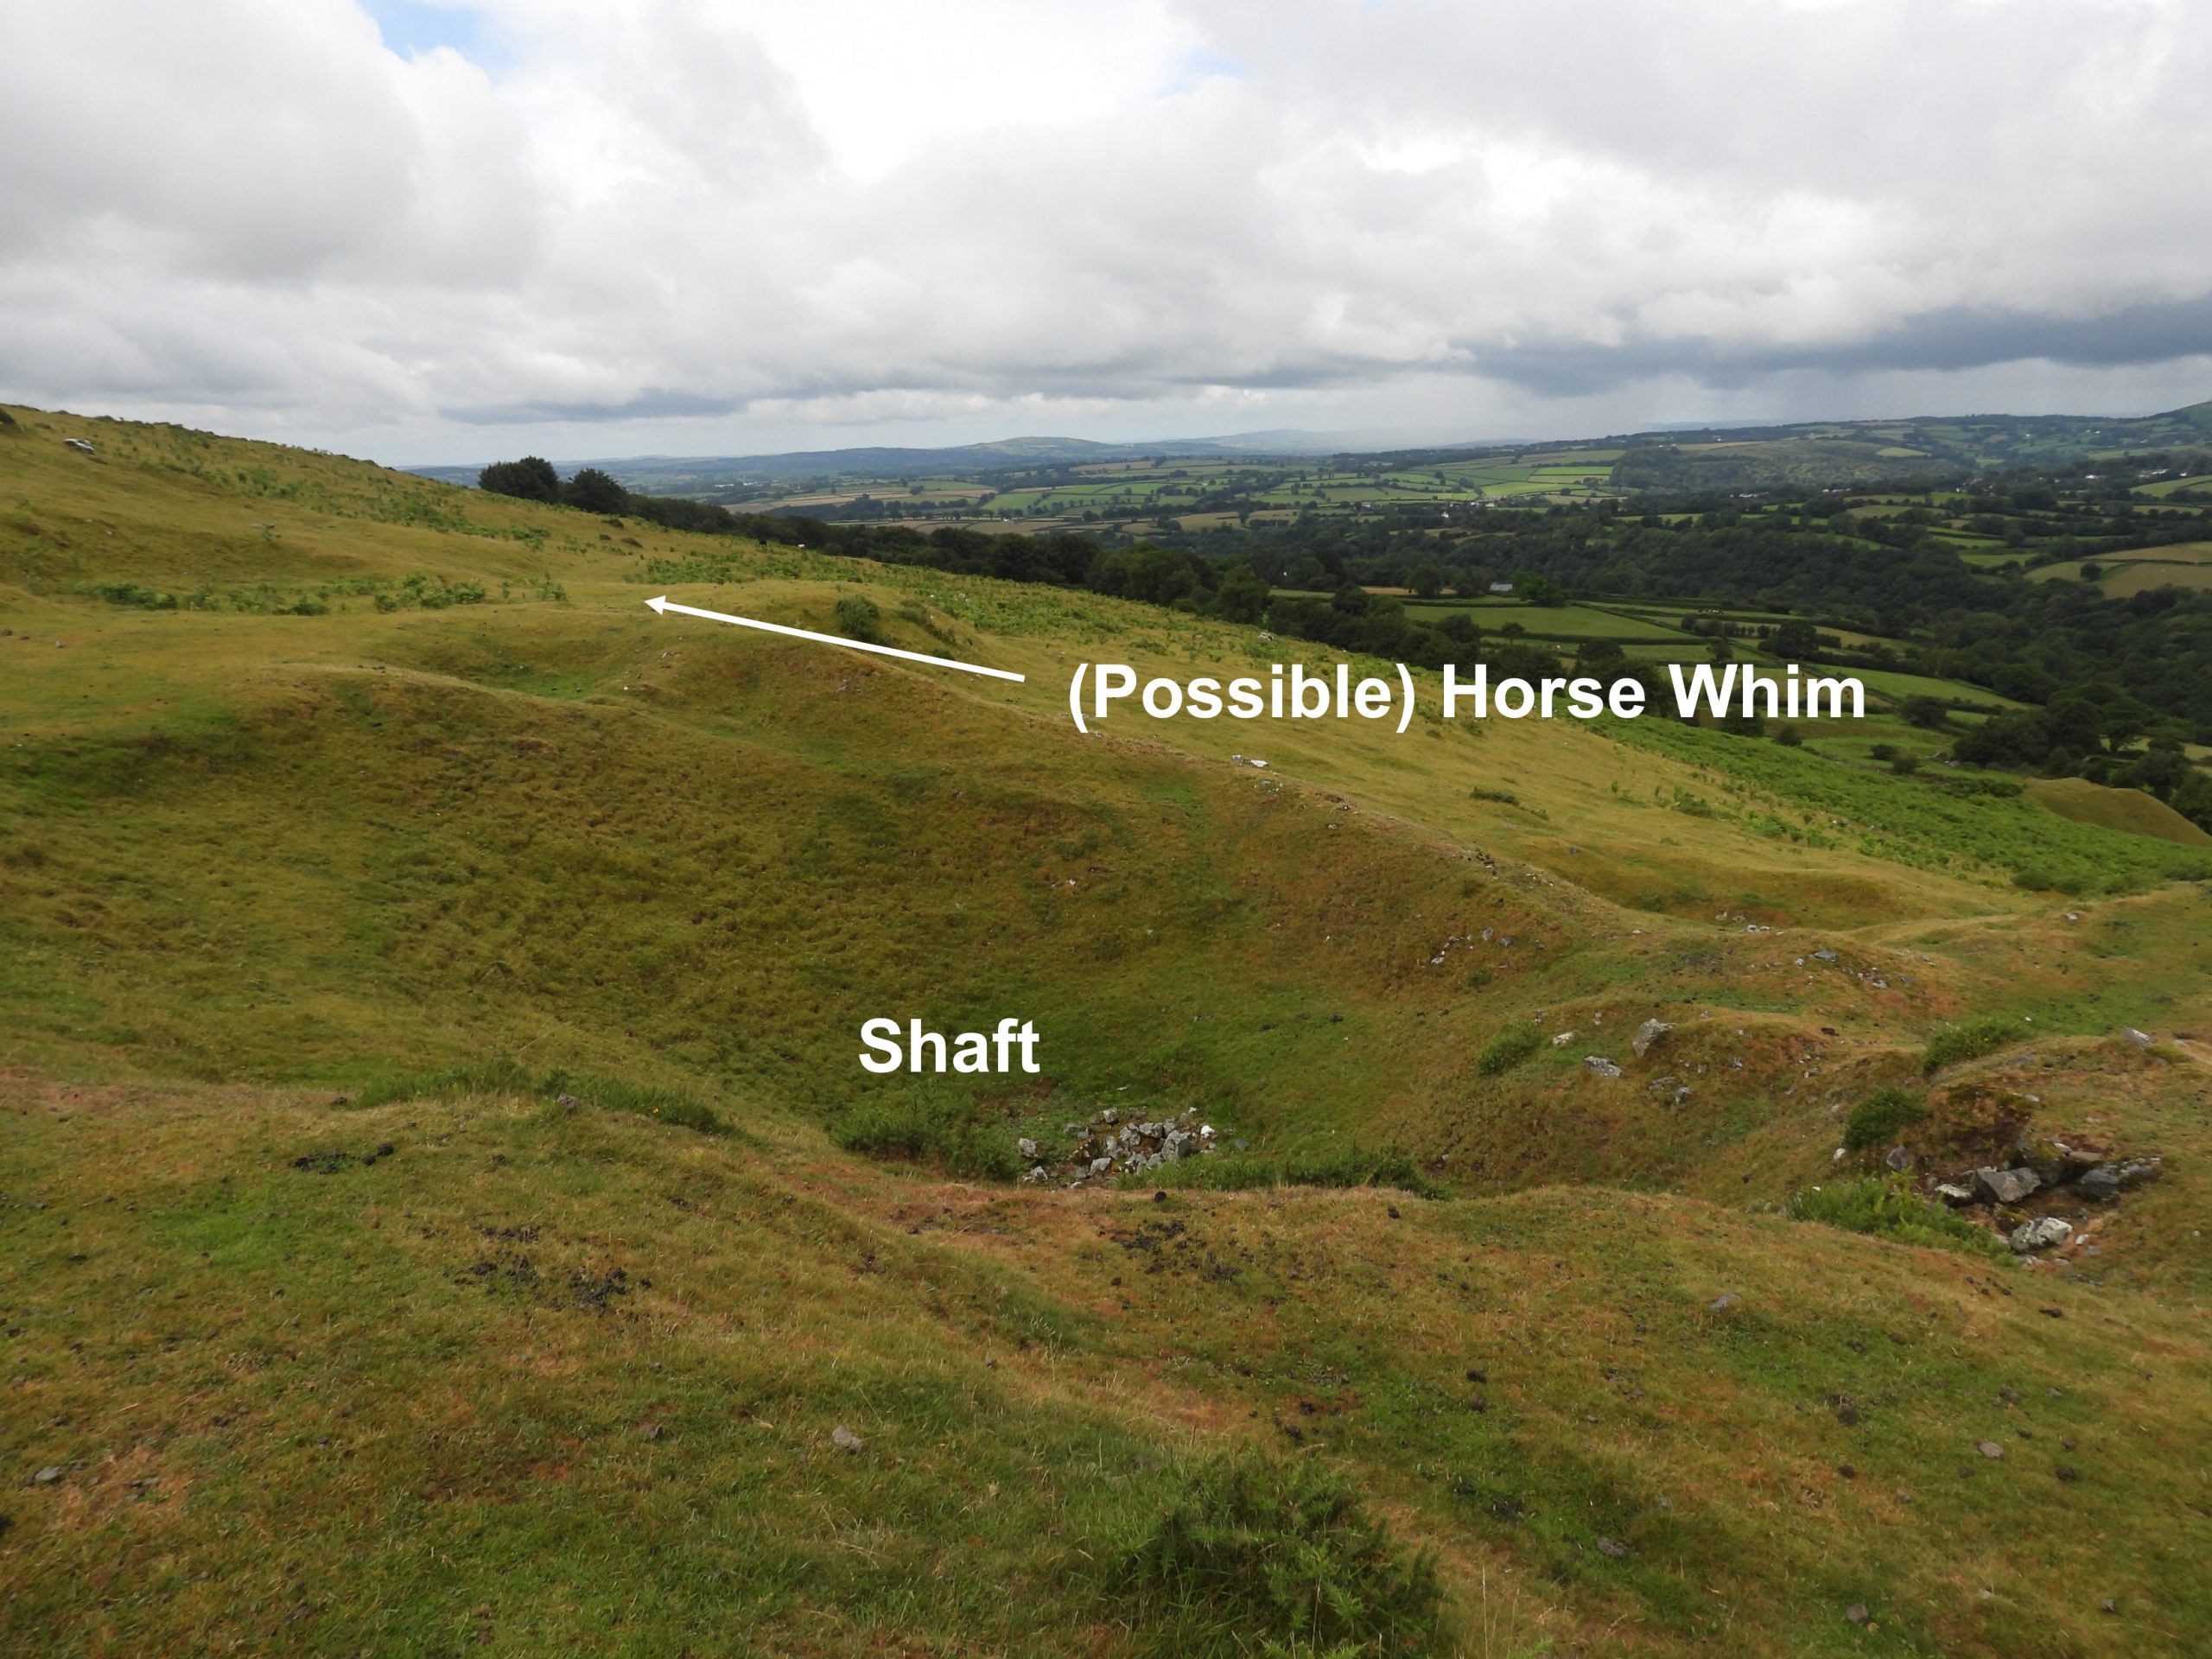 11. Horse Whim and Shaft